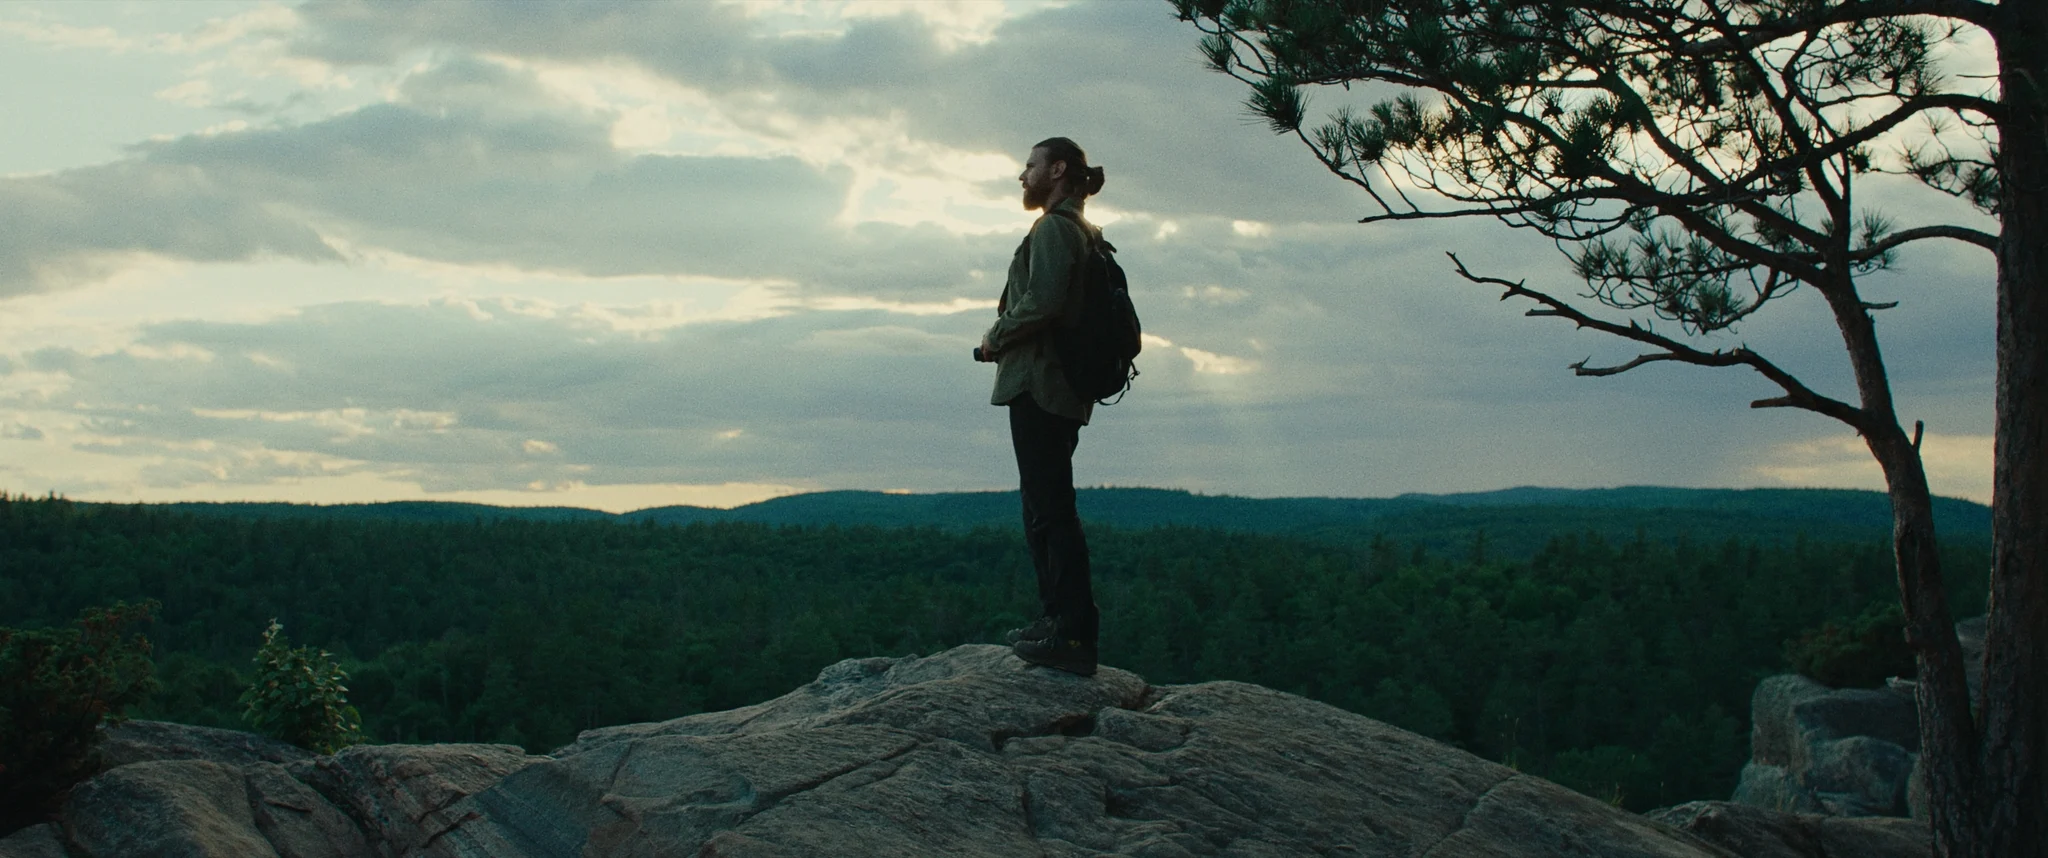 Man standing on a mountain top overlooking the trees holding a camera in hand